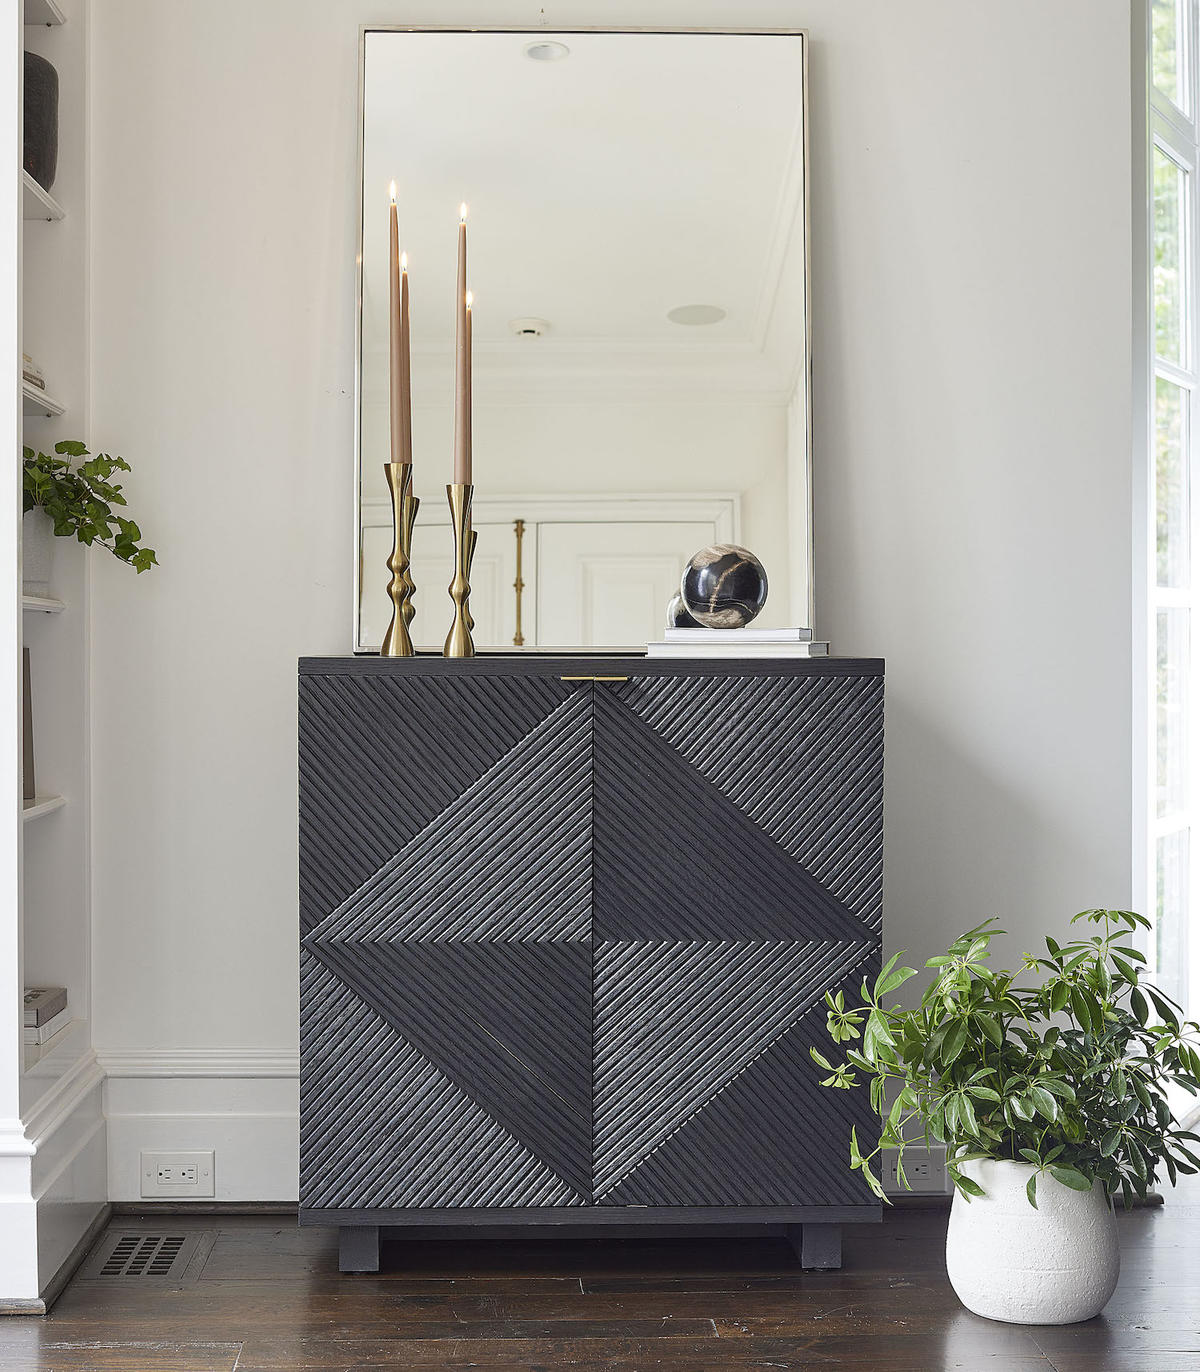 Basic geometry: 6 simple ways to integrate the triangle trend into a room